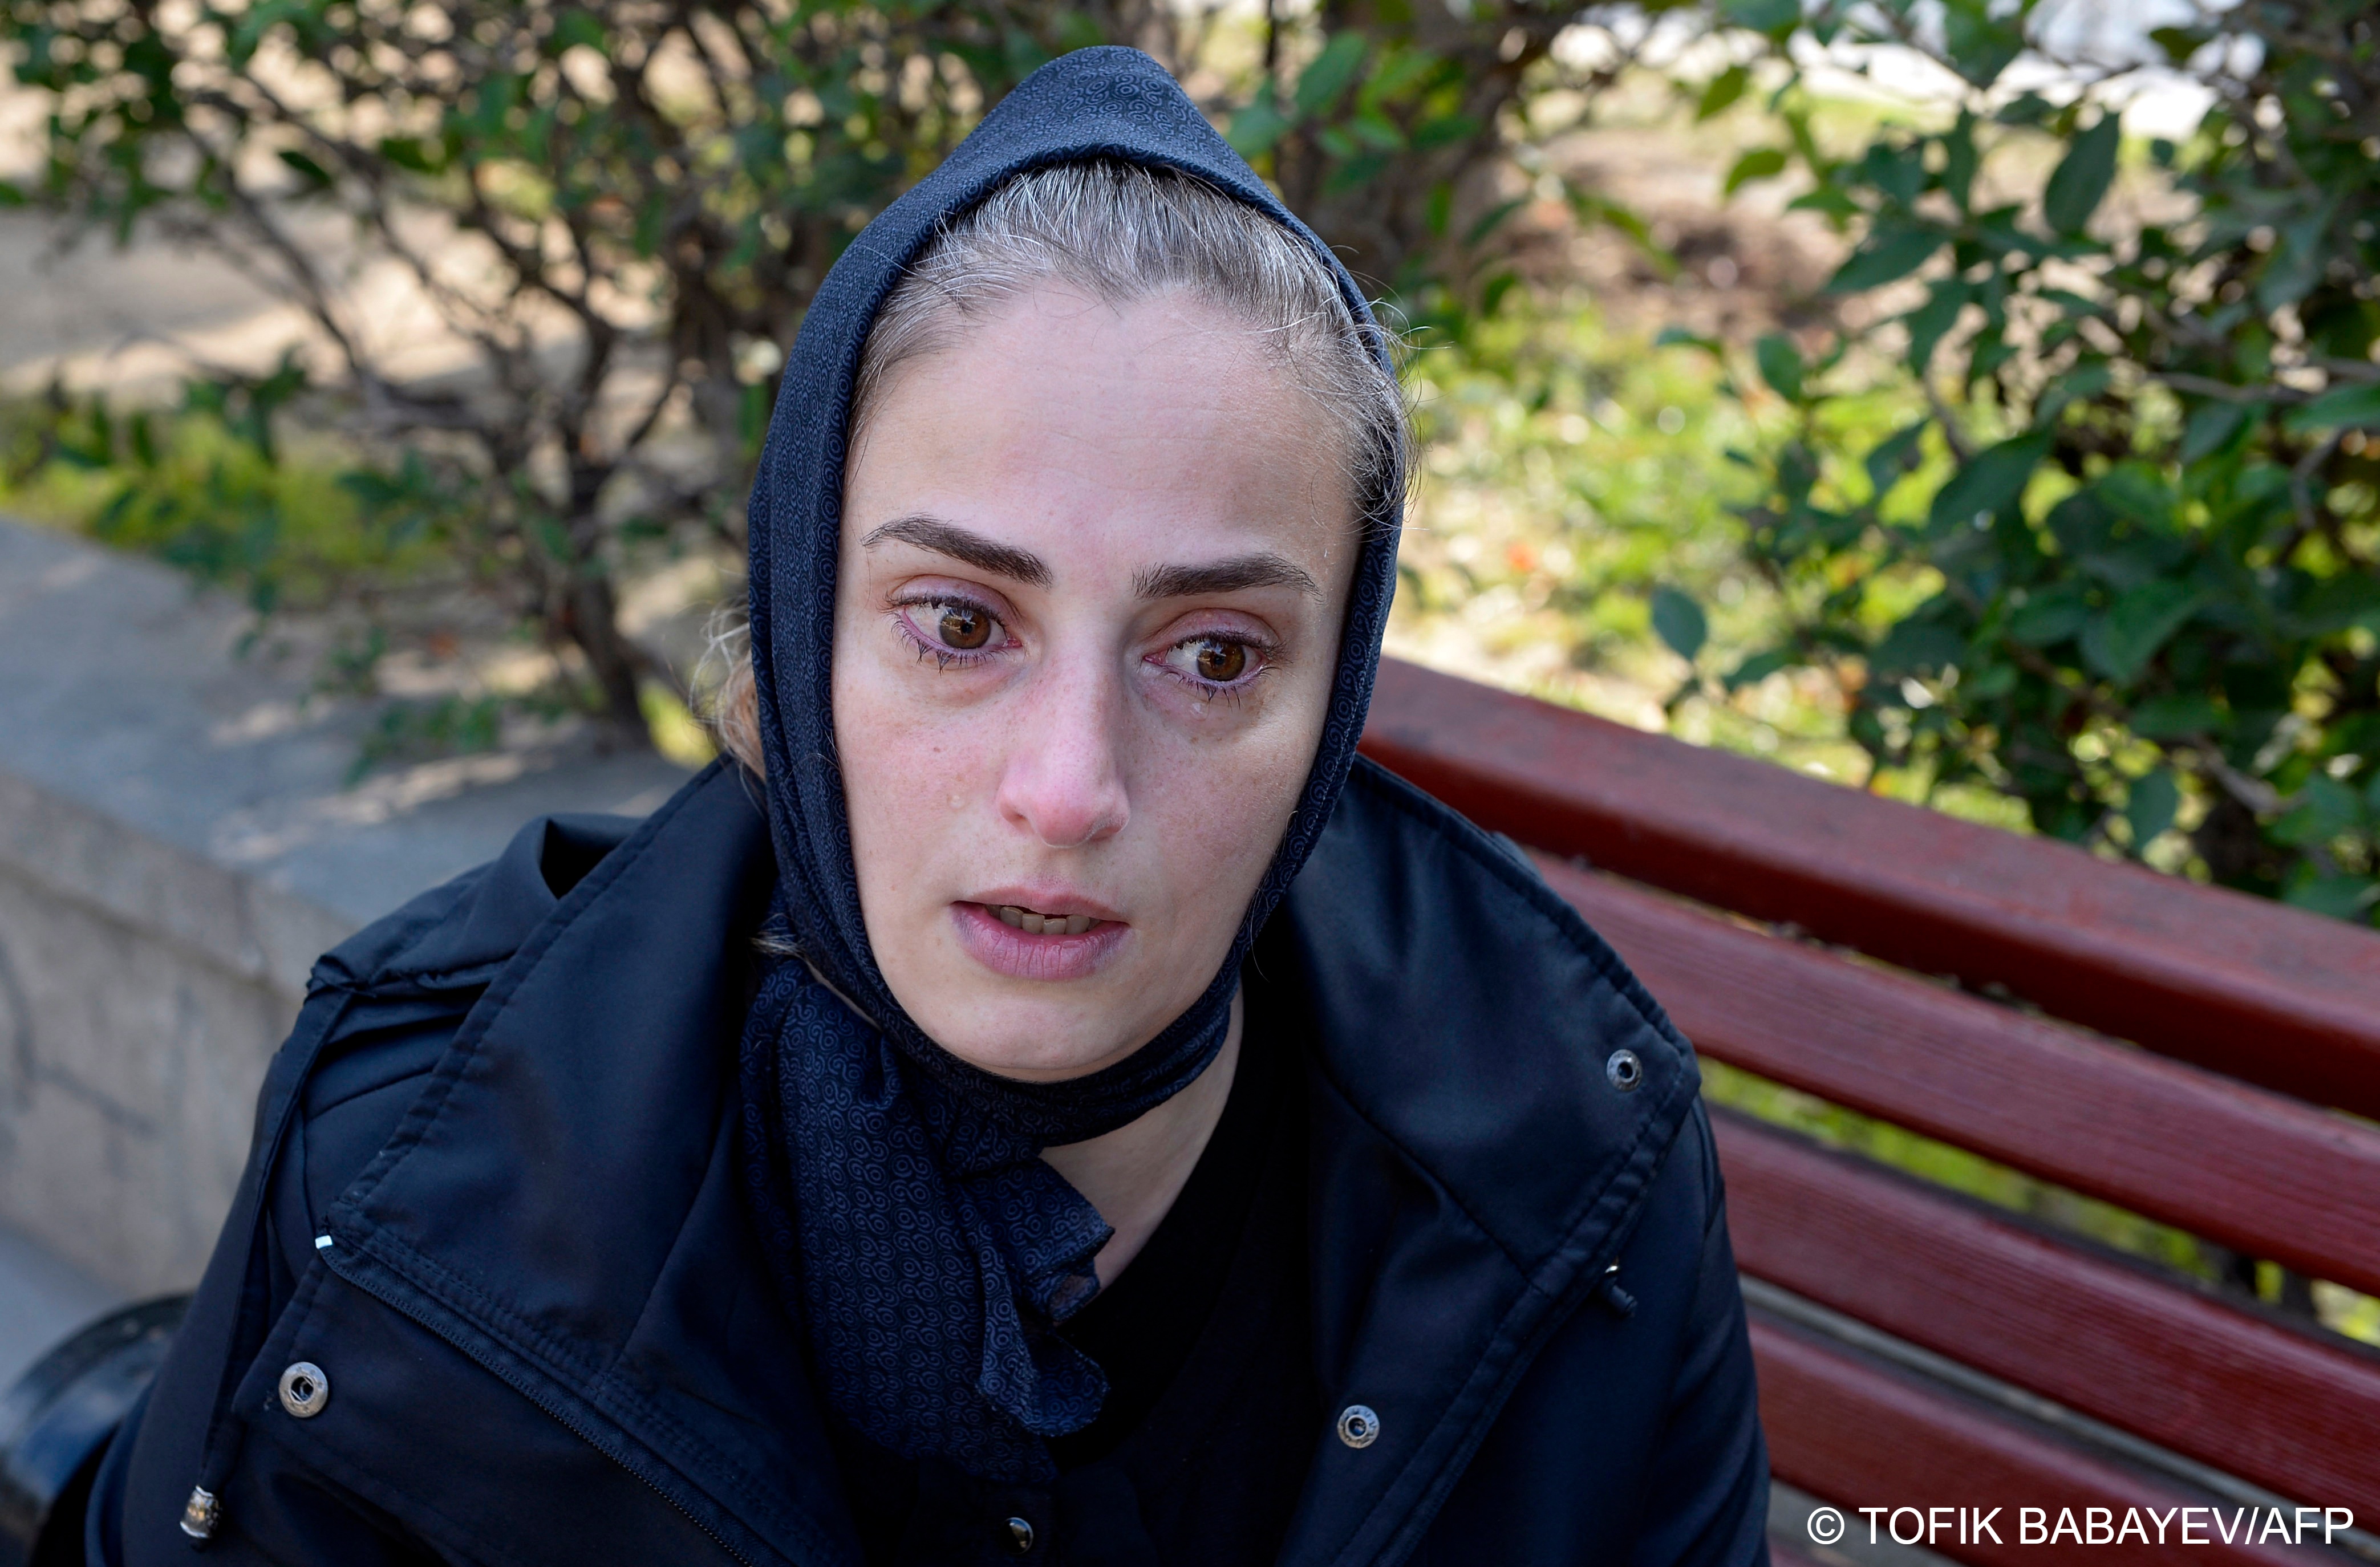  Dilara Bagiyeva‘s face grew pale as she recounted how, after suffering abuse from her husband for a decade, he turned on their eight-year-old daughter in a drunken fit last year. Bagiyeva is among thousands of women subjected to domestic violence in the conservative Caspian Sea country where there are growing concerns over the issue.